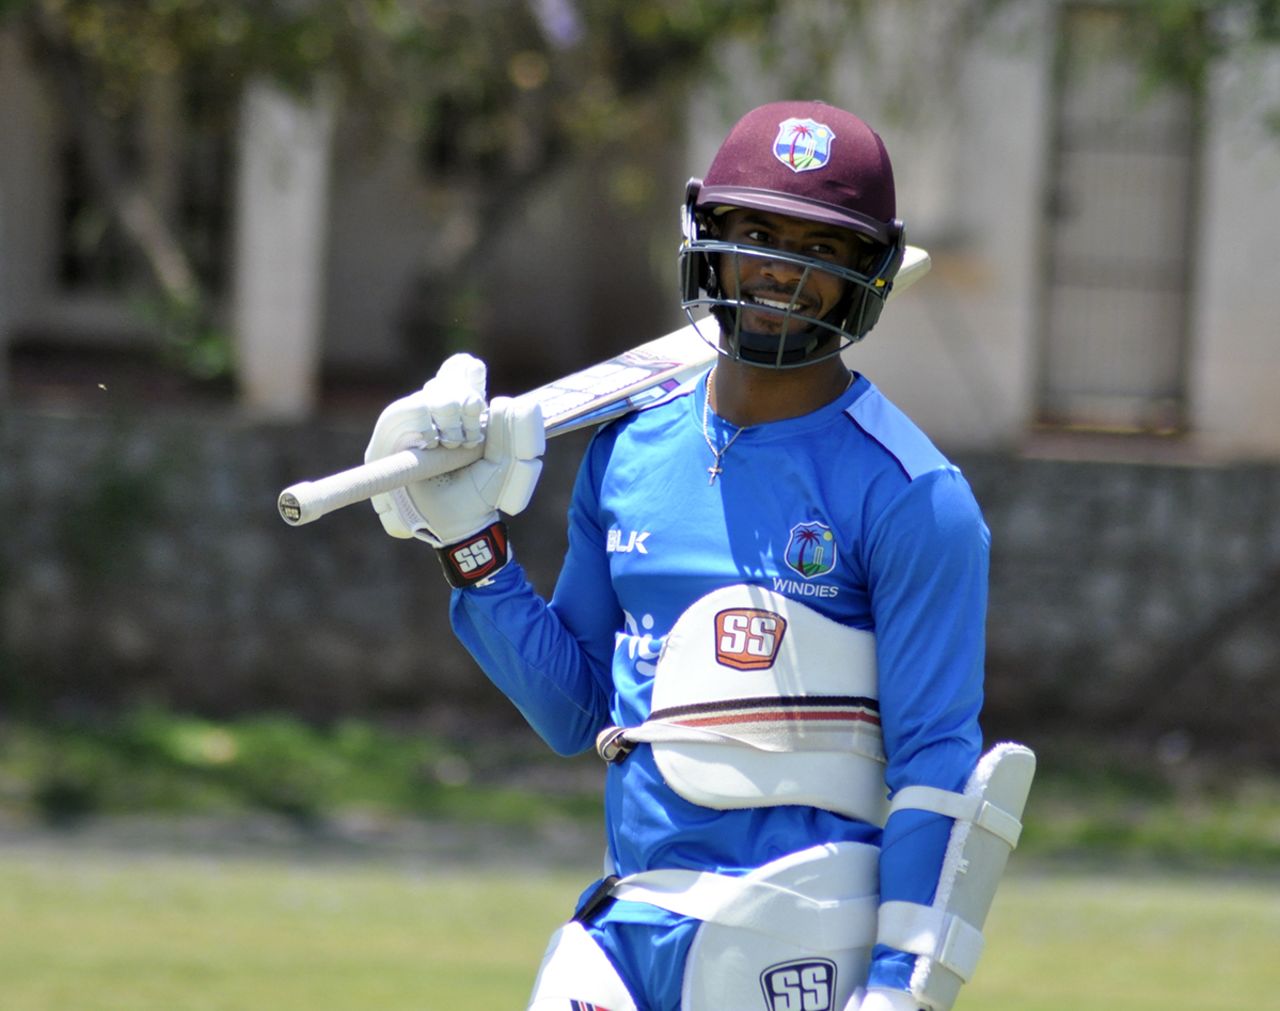 Shai Hope, all padded up at a practice session, Bulawayo, October 13, 2017